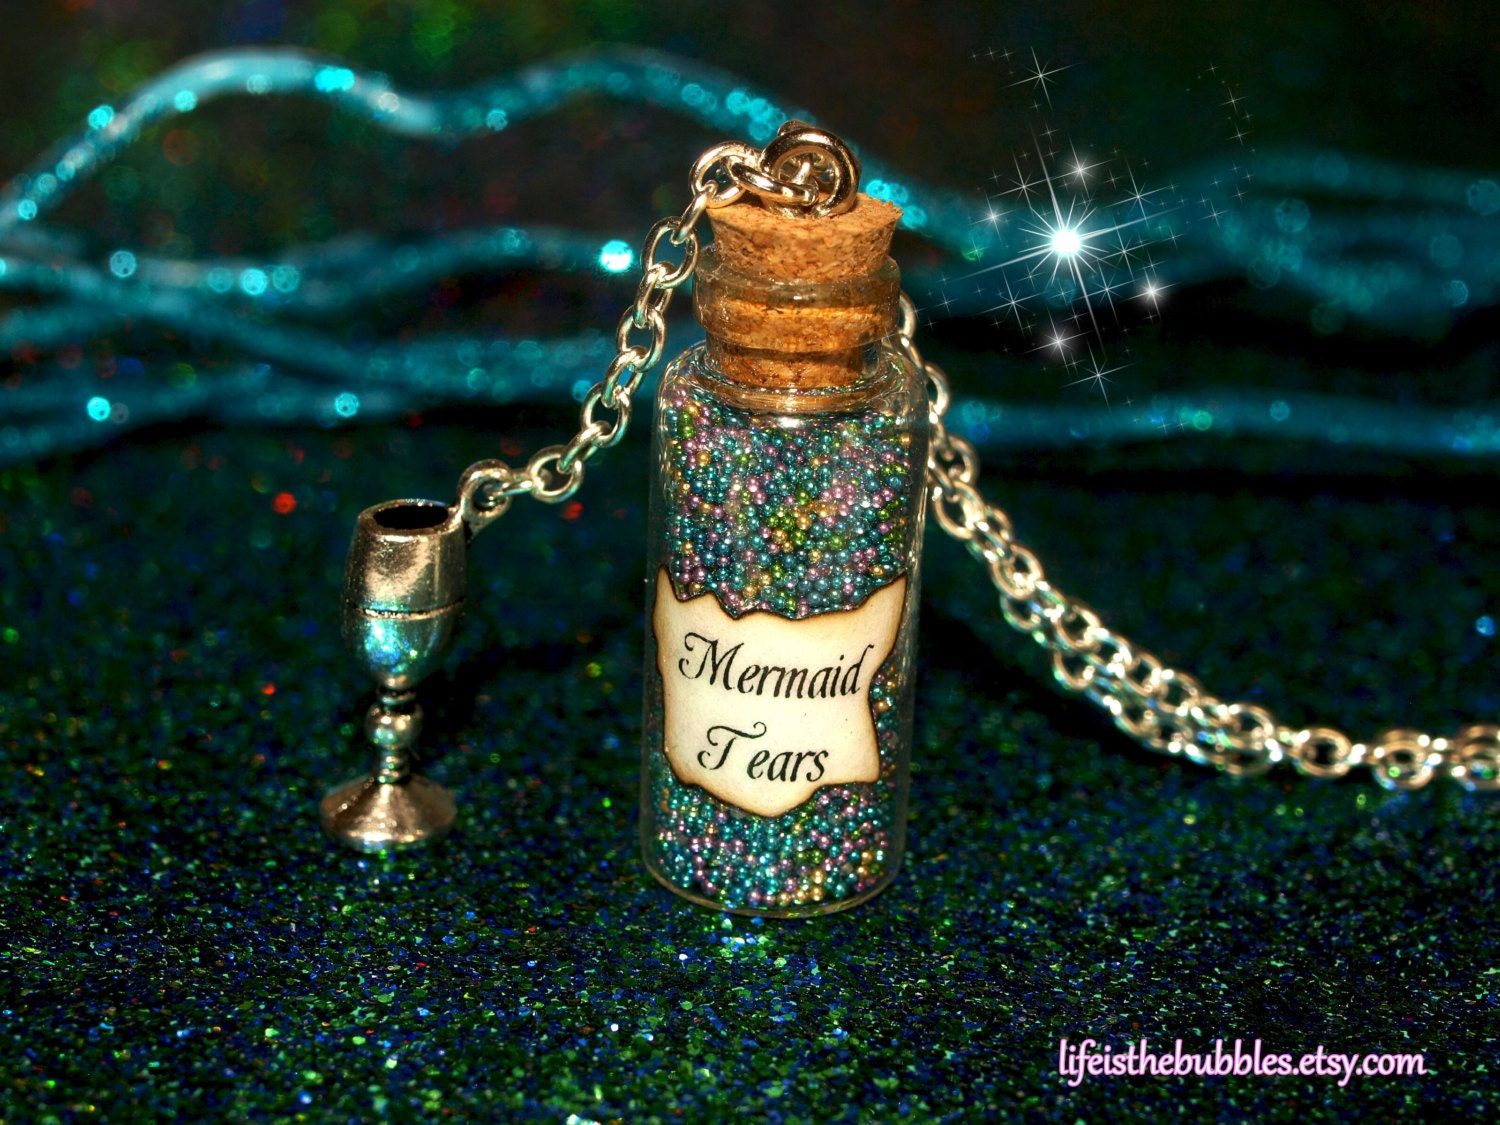 Mermaid Tears Magical Bottle with a Silver by LifeistheBubbles